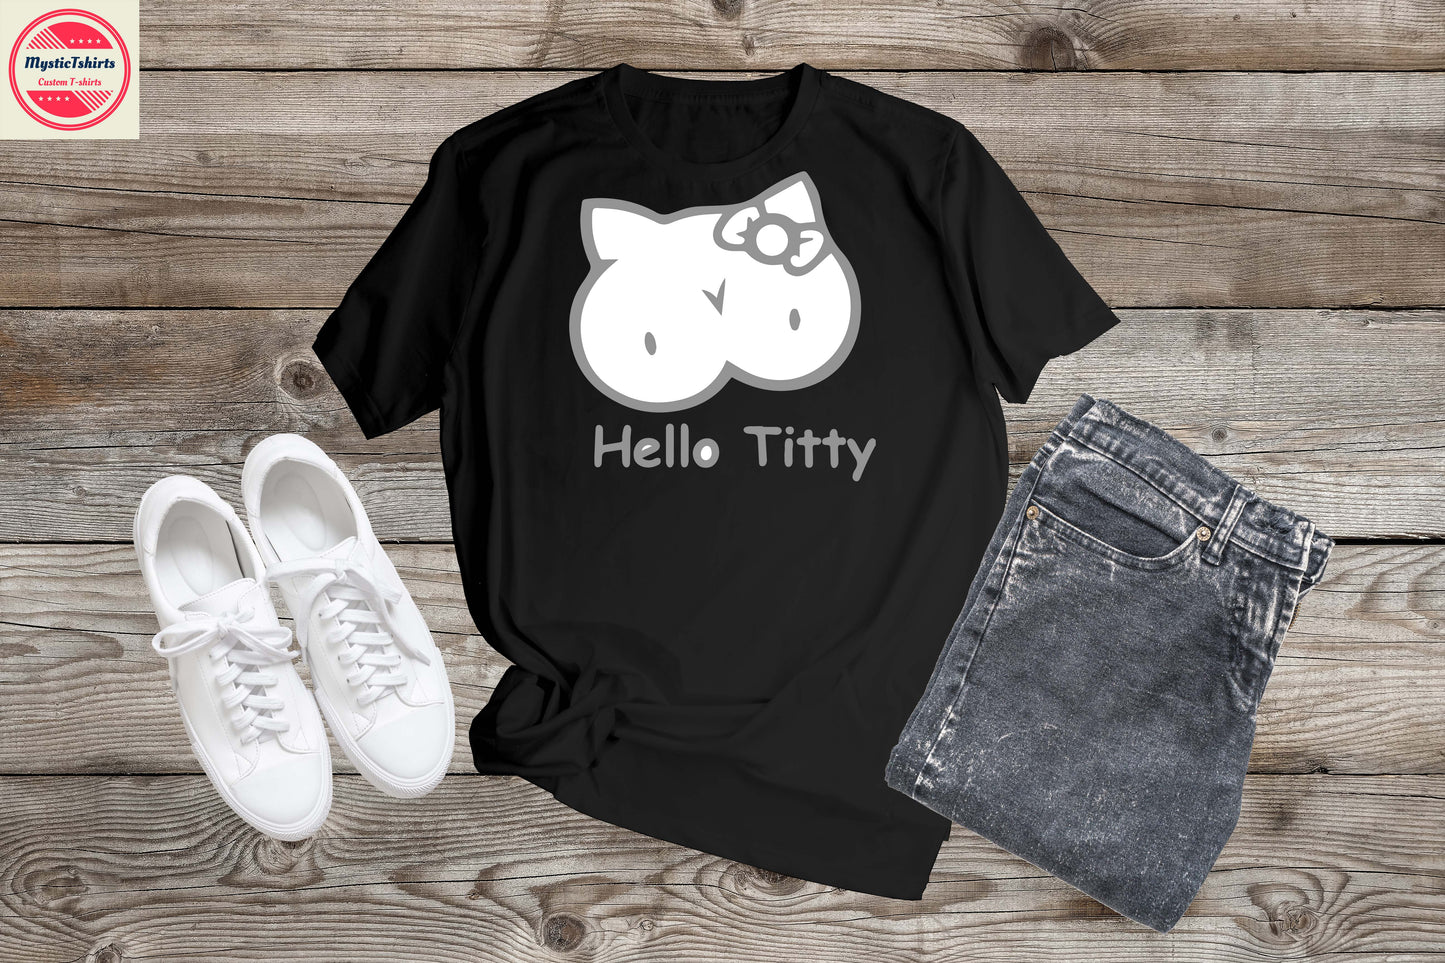 195. HELLO TITTY, Custom Made Shirt, Personalized T-Shirt, Custom Text, Make Your Own Shirt, Custom Tee